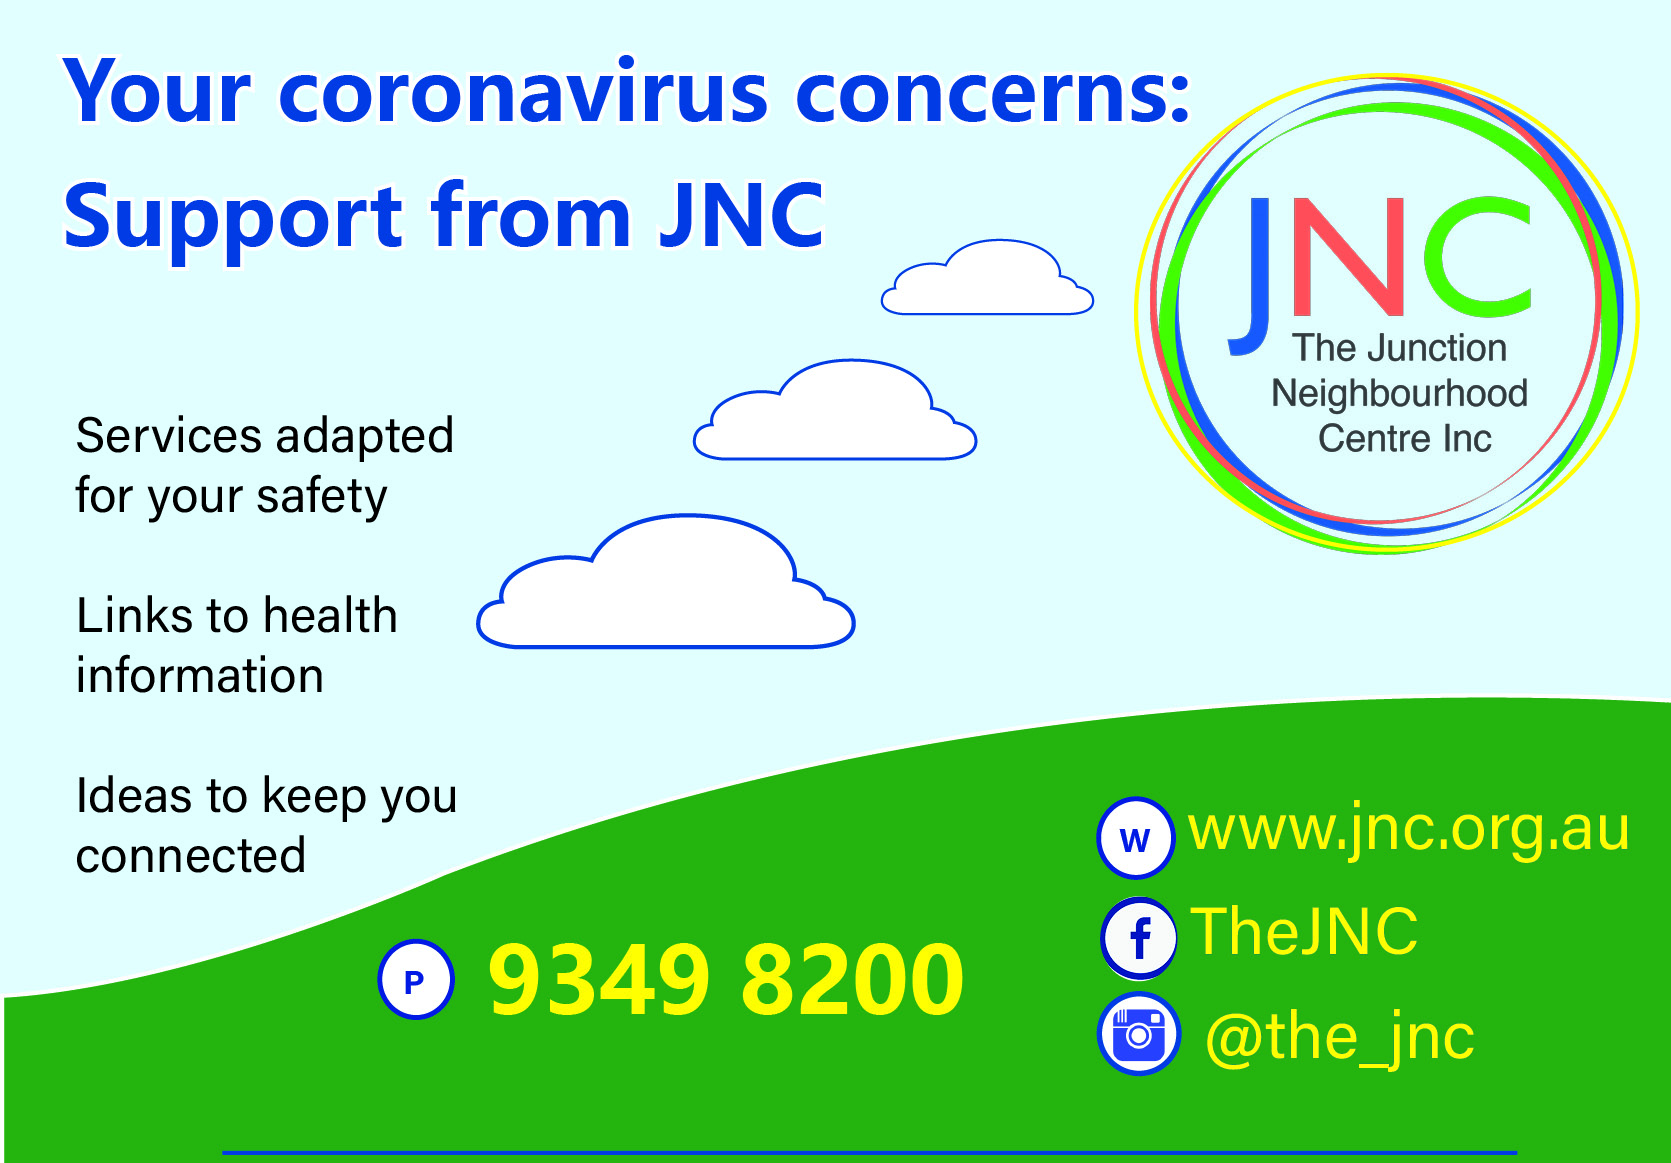 poster about JNC support for our community's wellbeing during coronavirus